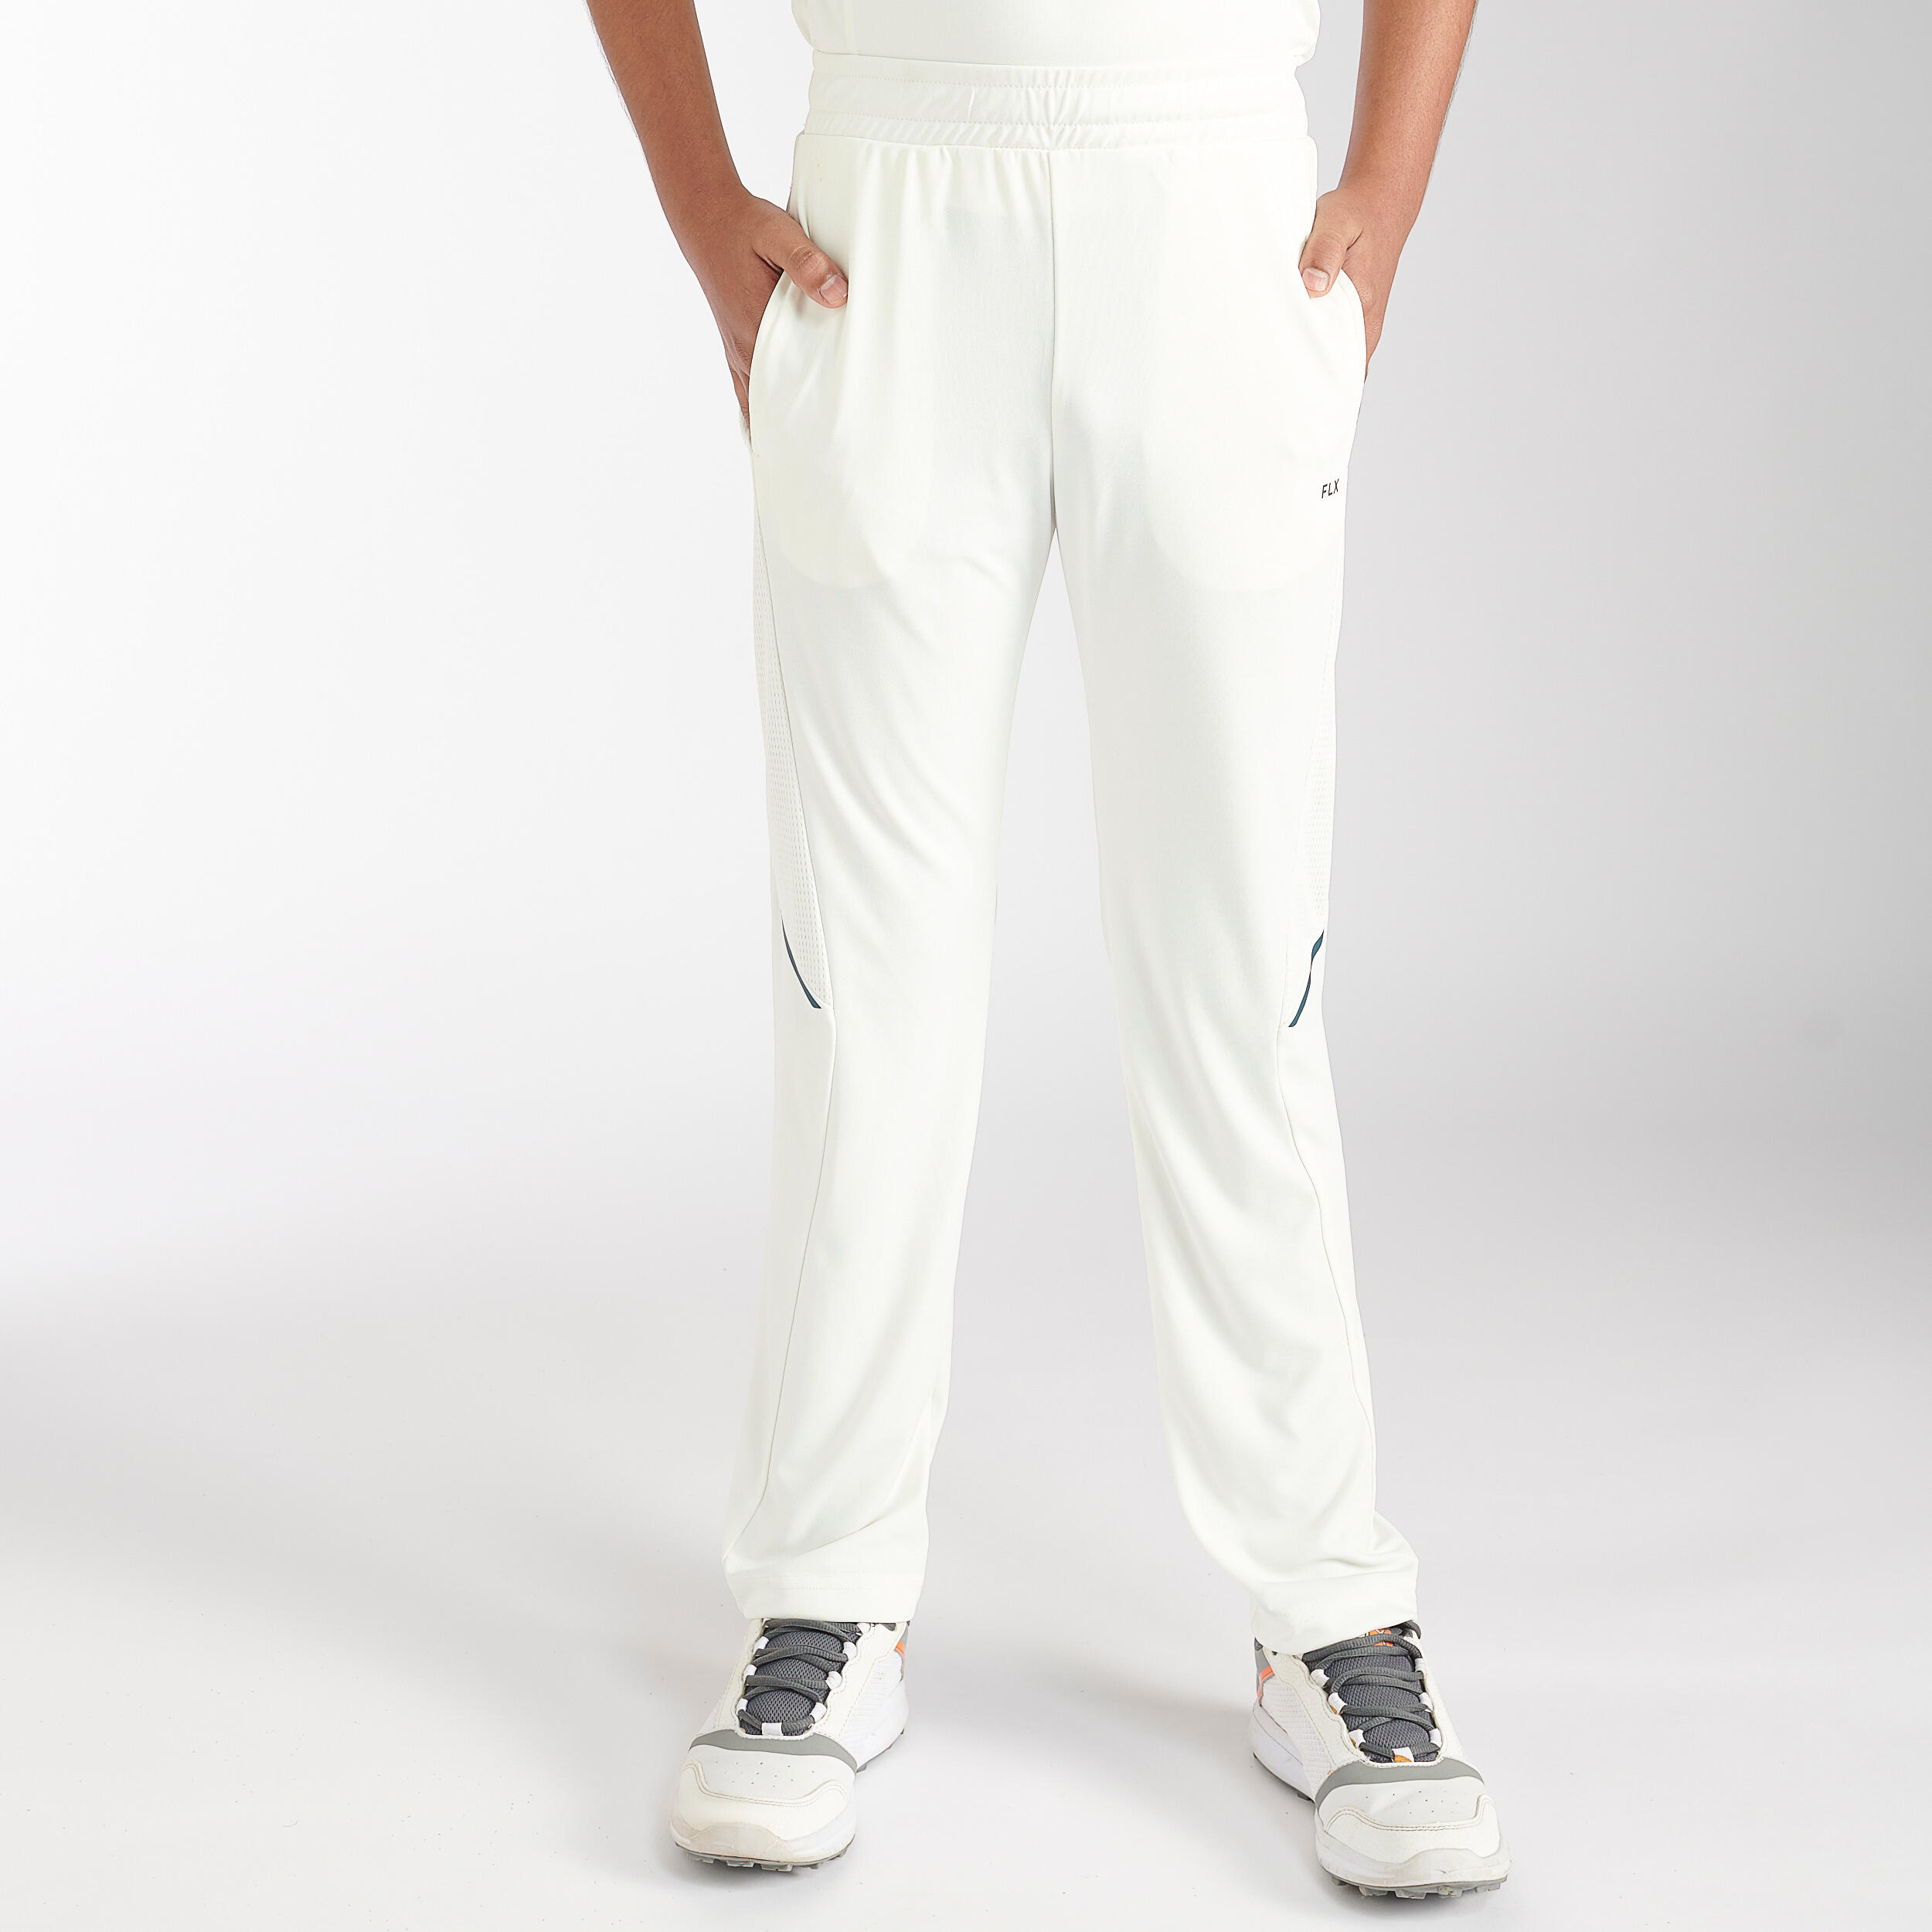 Buy Mens Cricket Straight Fit Trackpants CTS 500 Blue Online  Decathlon